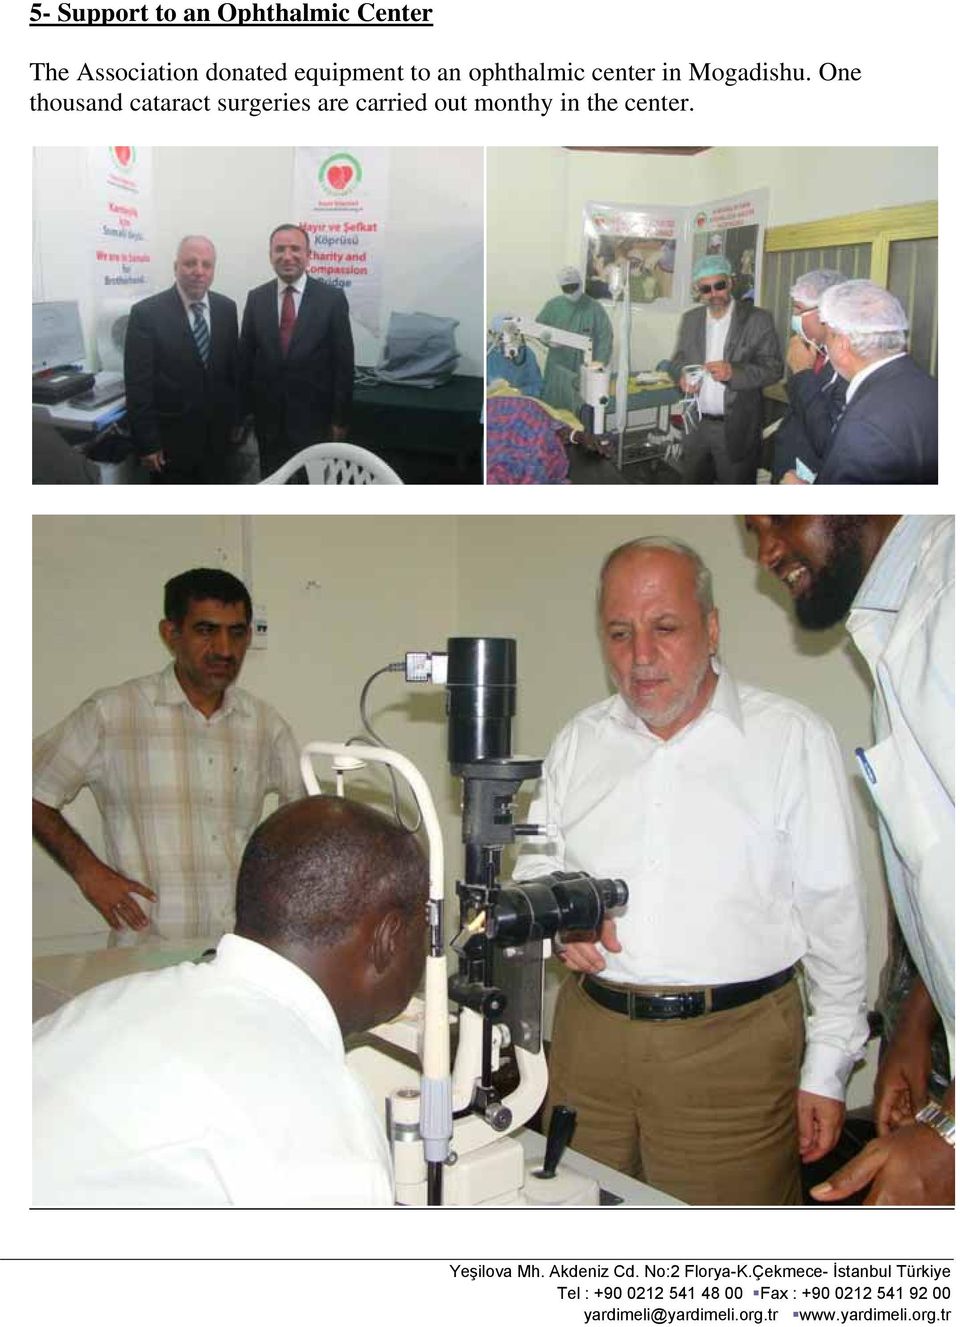 One thousand cataract surgeries are carried out monthy in